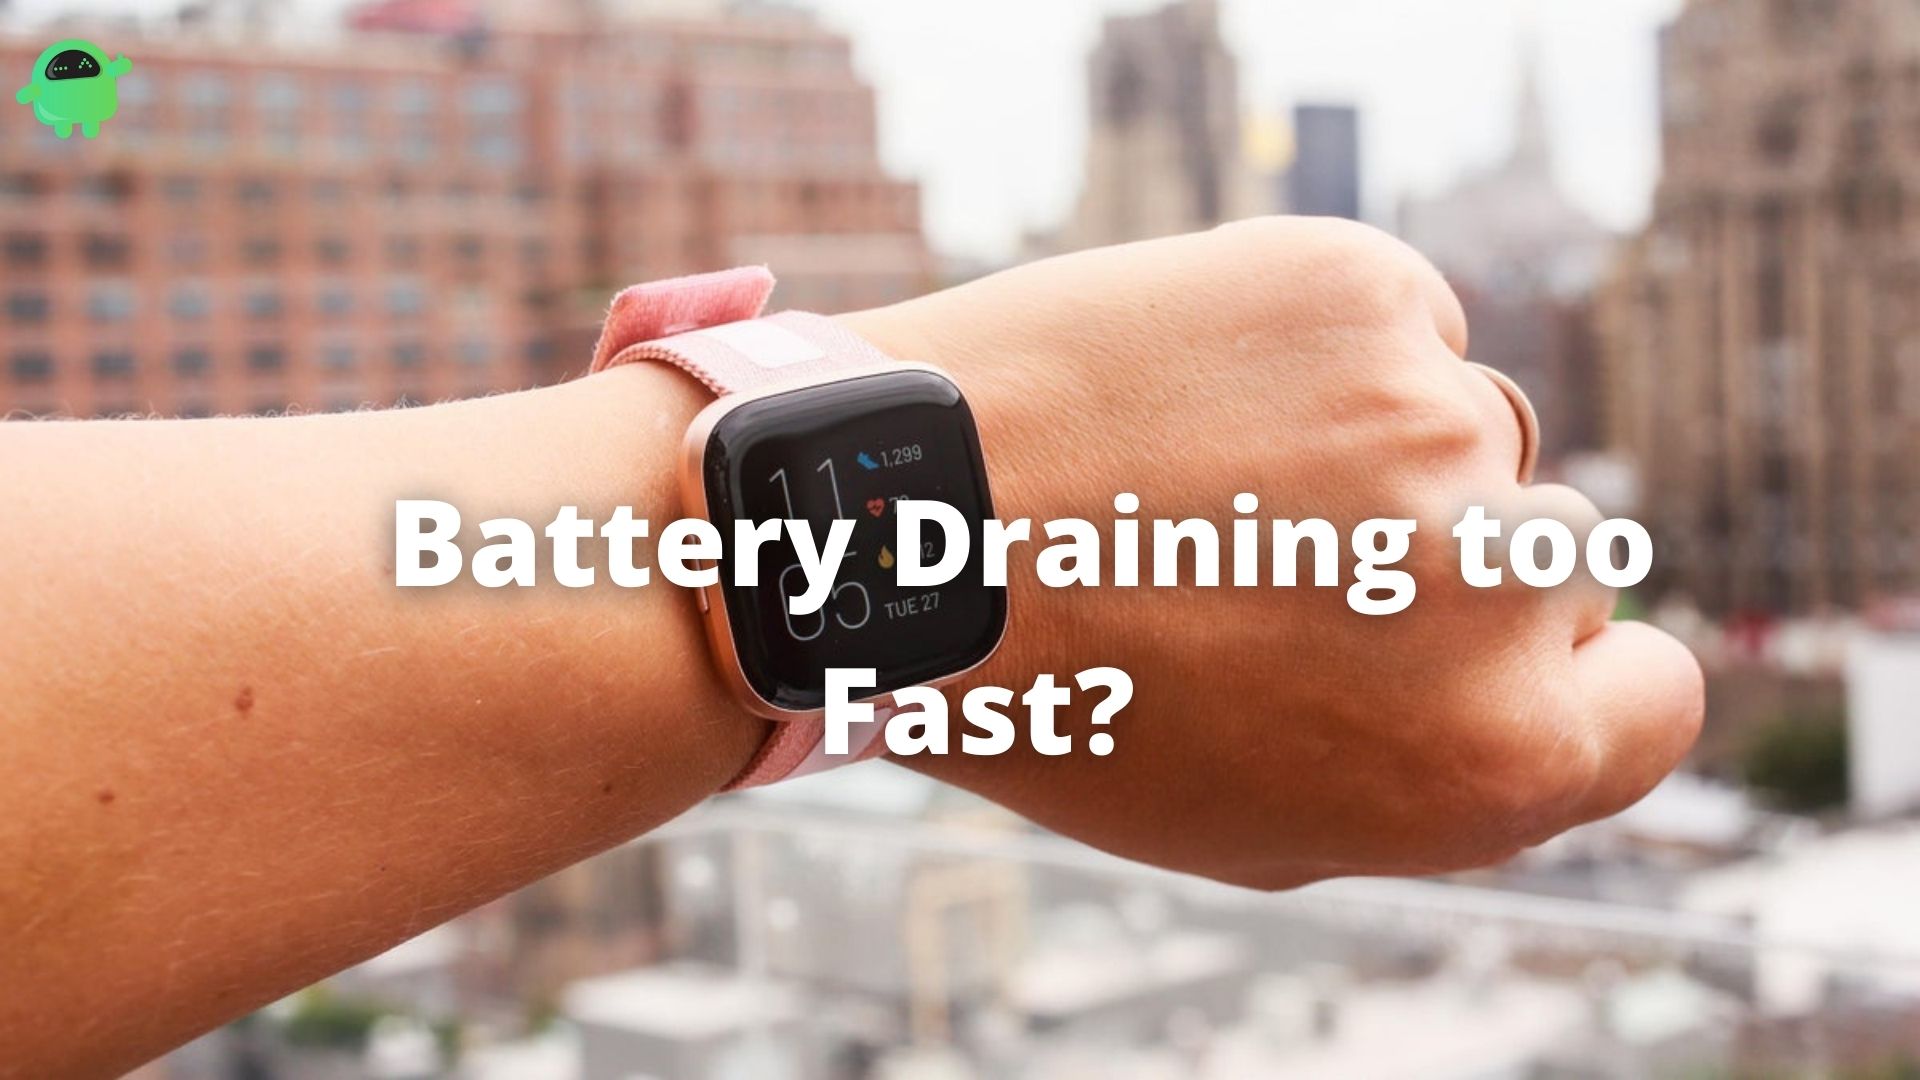 Fitbit Versa 2 or 3 Battery Draining Too Fast, How To Fix?